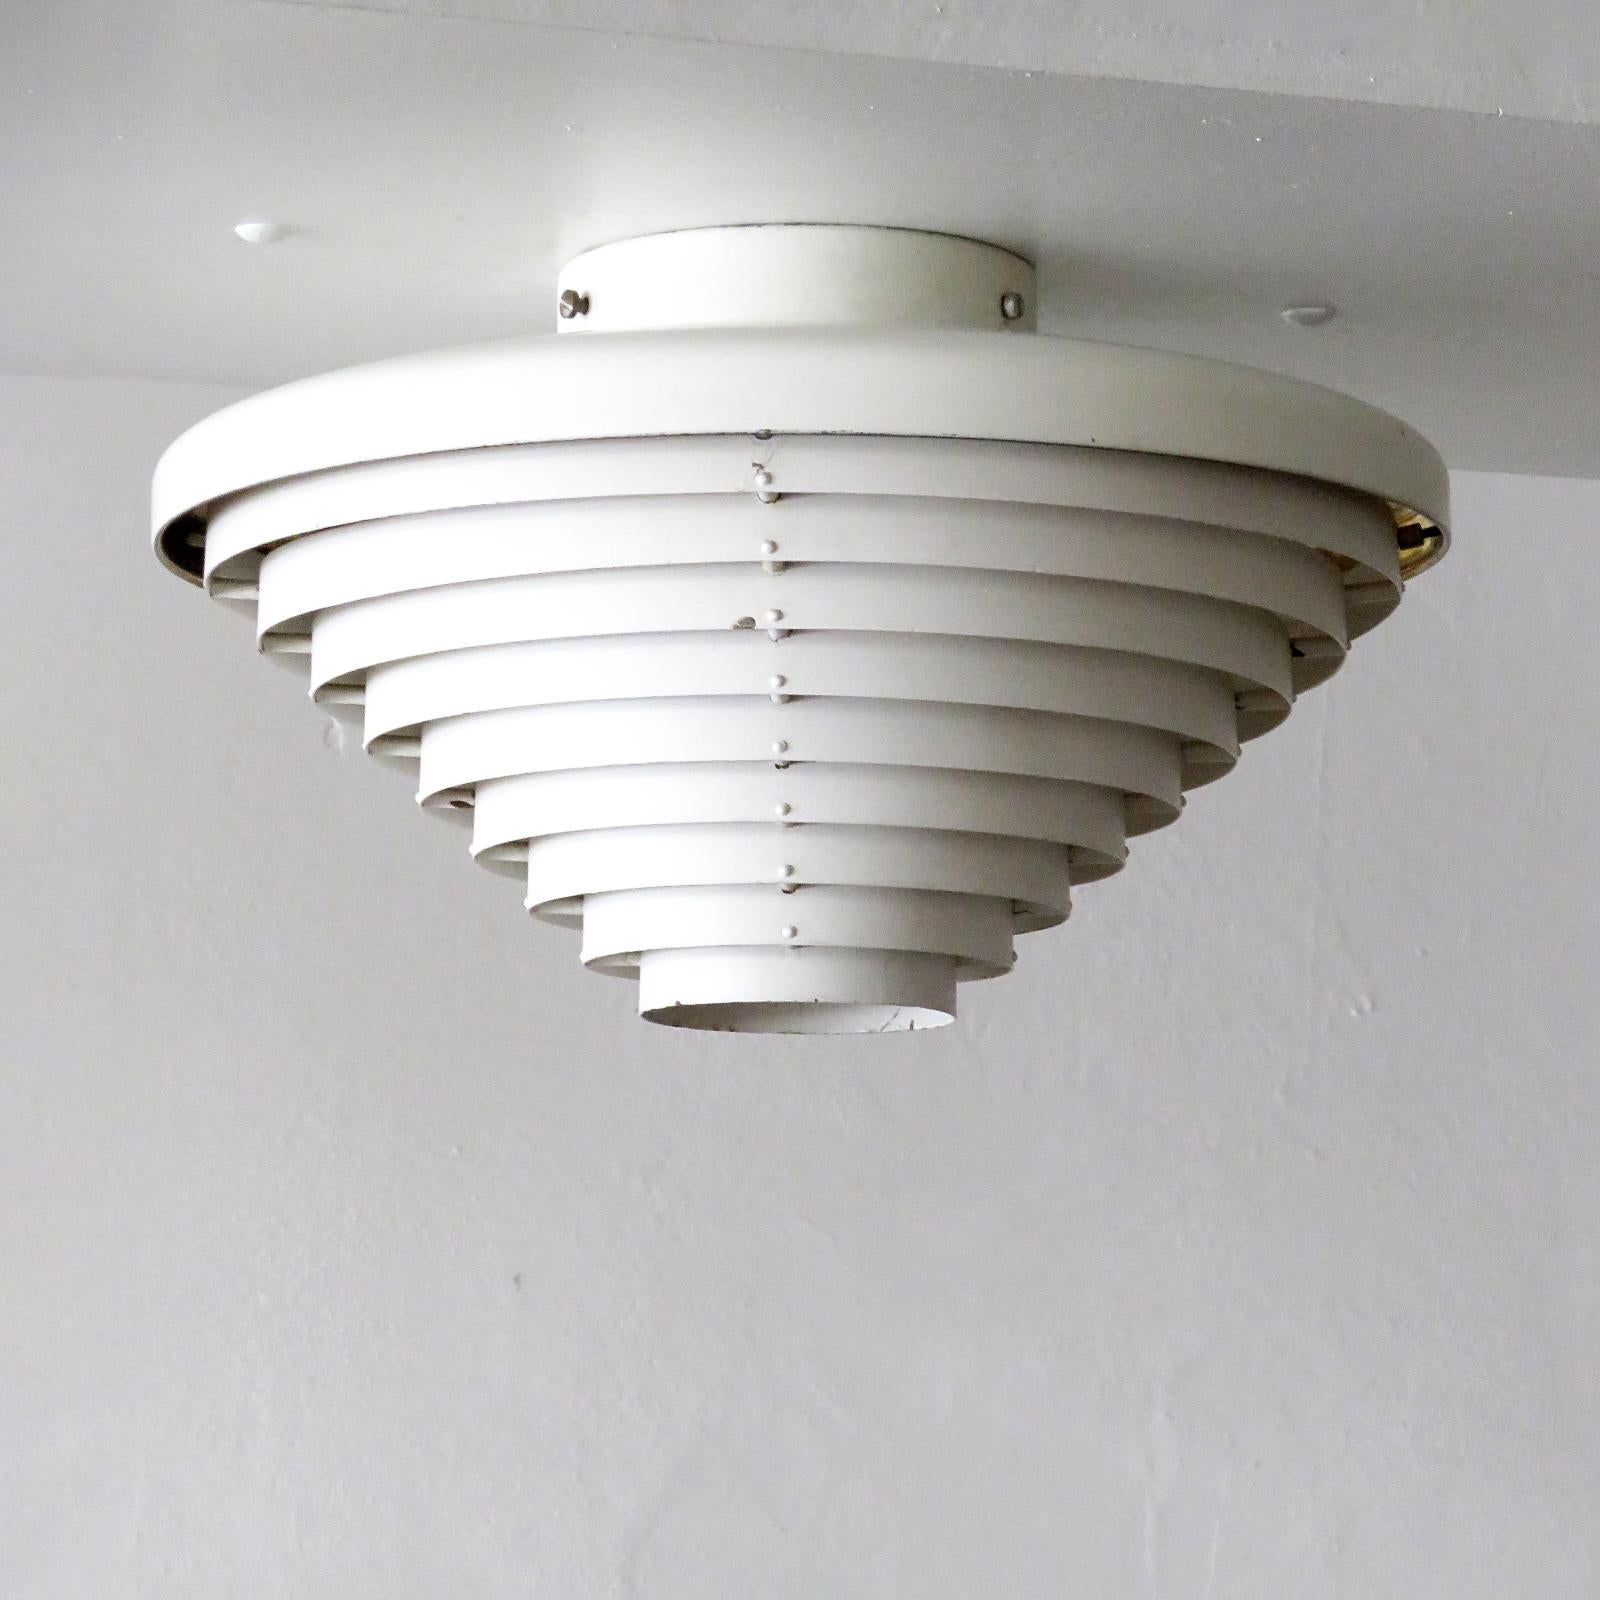 Wonderful model 'A205' ceiling lamp by Alvar Aalto, originally designed for the National Pensions building in Helsinki, made of louvered, white lacquered steel rings under a brass 'roof', early example by original manufacture Valaistustyö Ky,